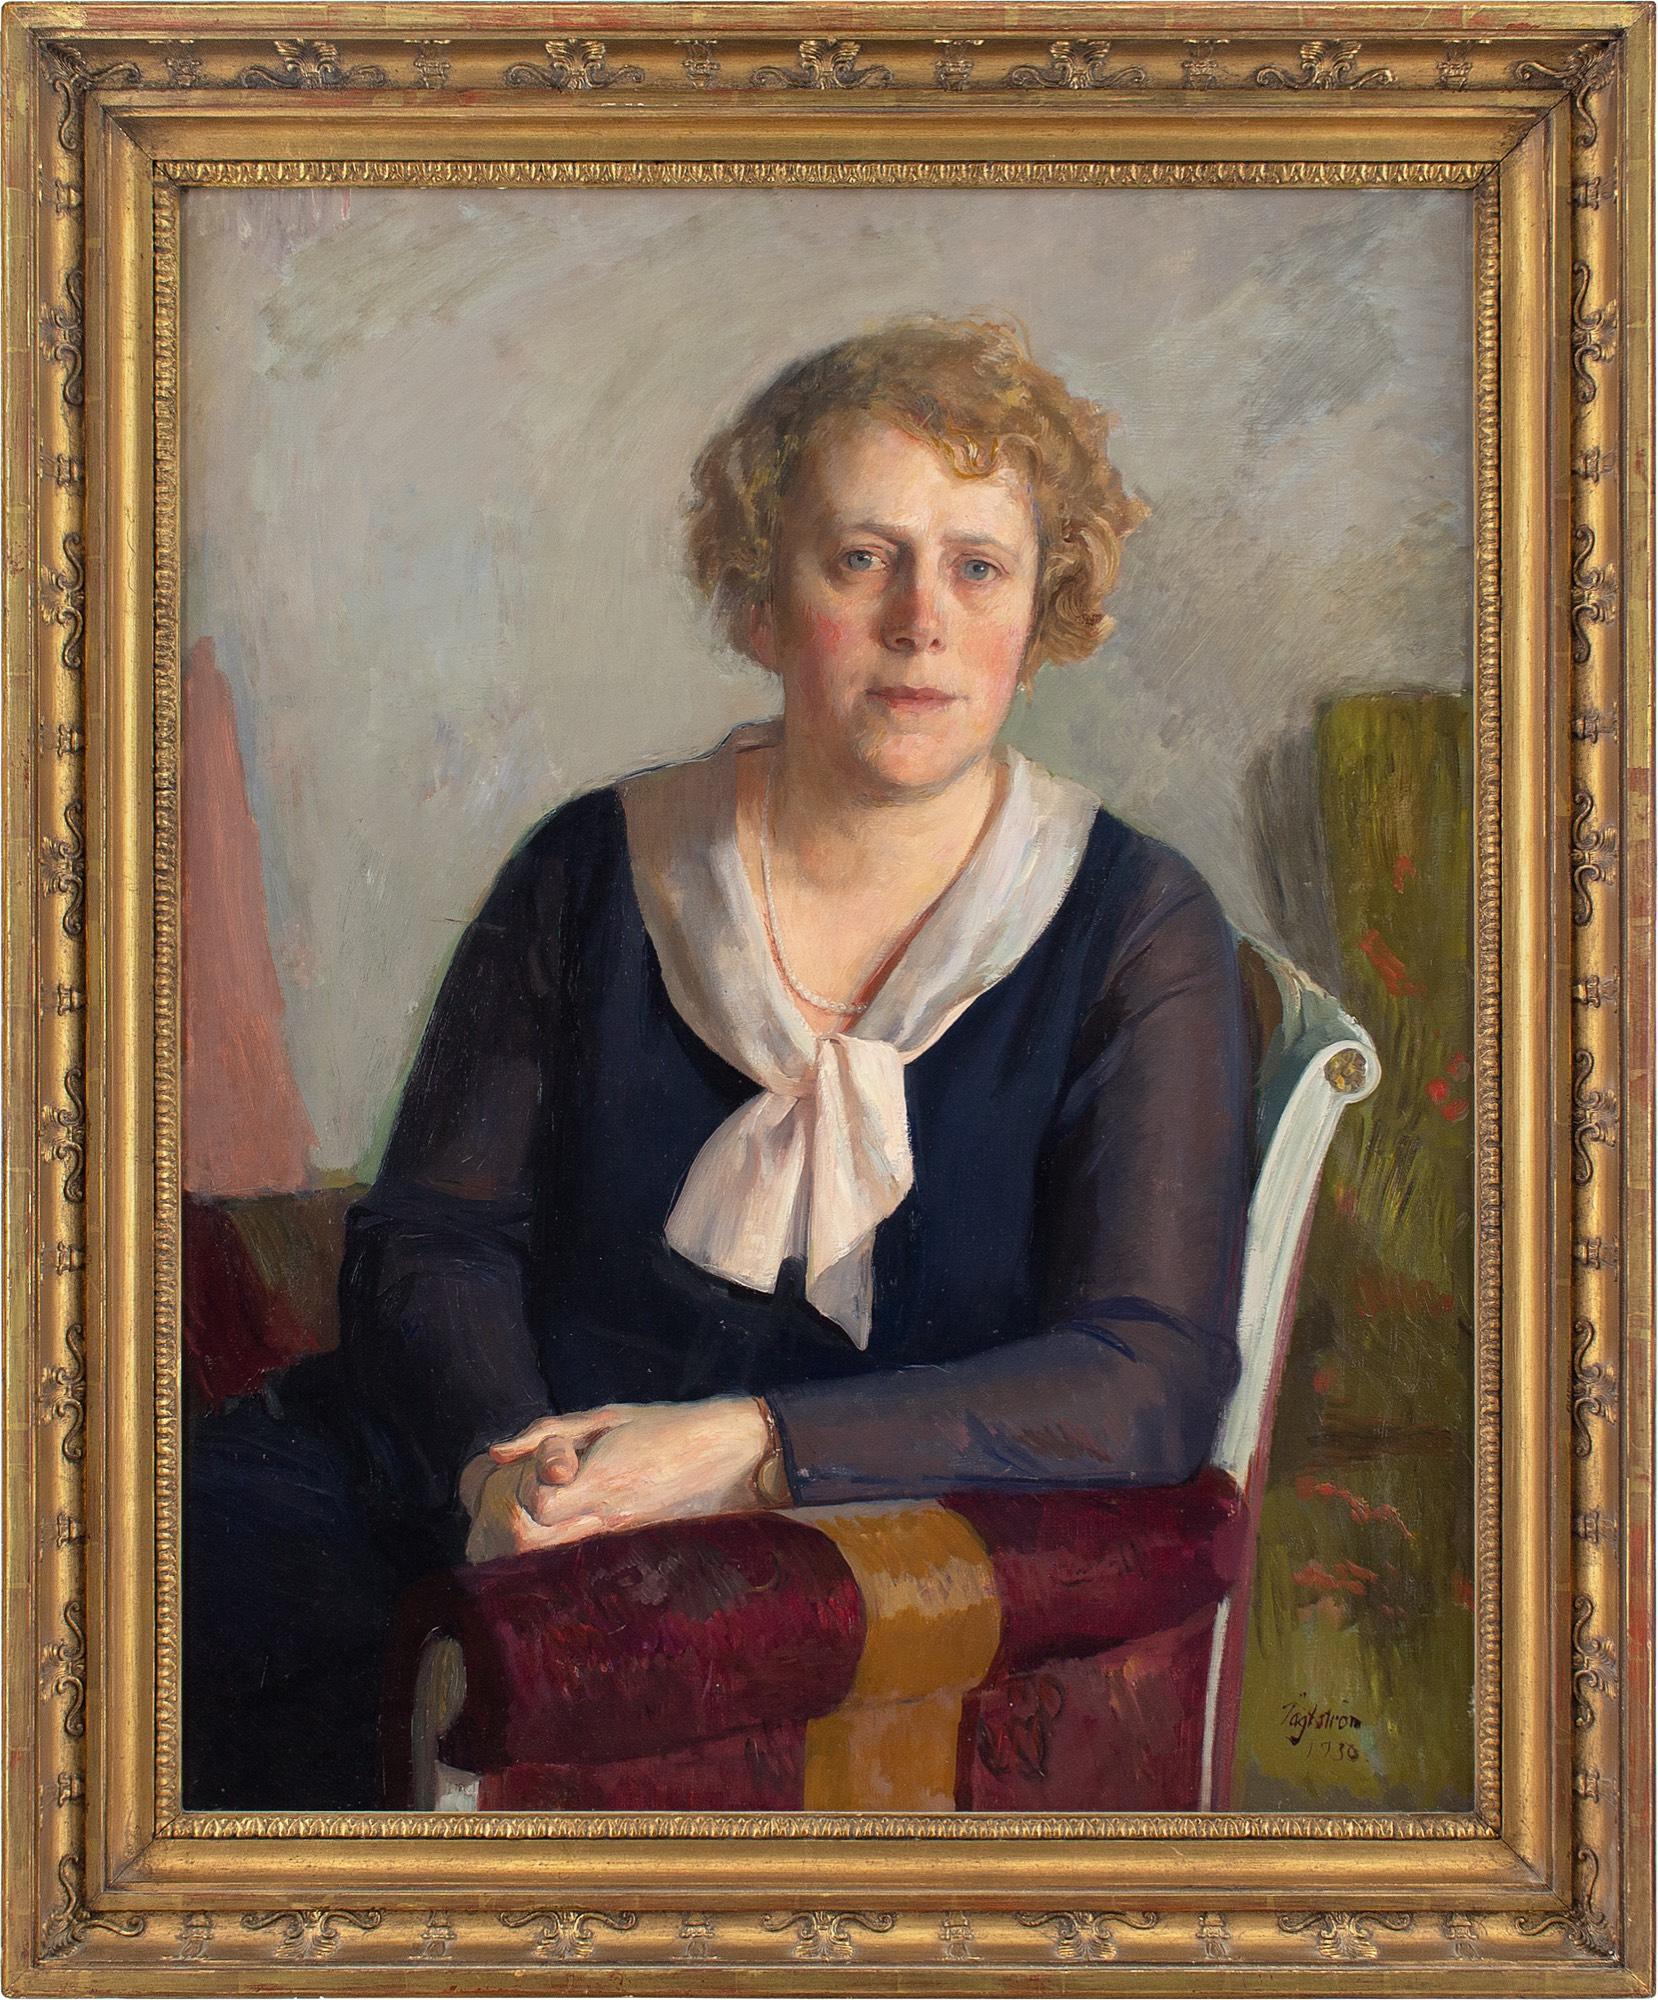 This early 20th-century oil painting by Swedish artist David Tägtström (1894-1981) depicts a seated woman referred to as ‘Hegert’.

Leaning forward as if listening intently to a family conversation, she clasps her hands. The veins visible through a